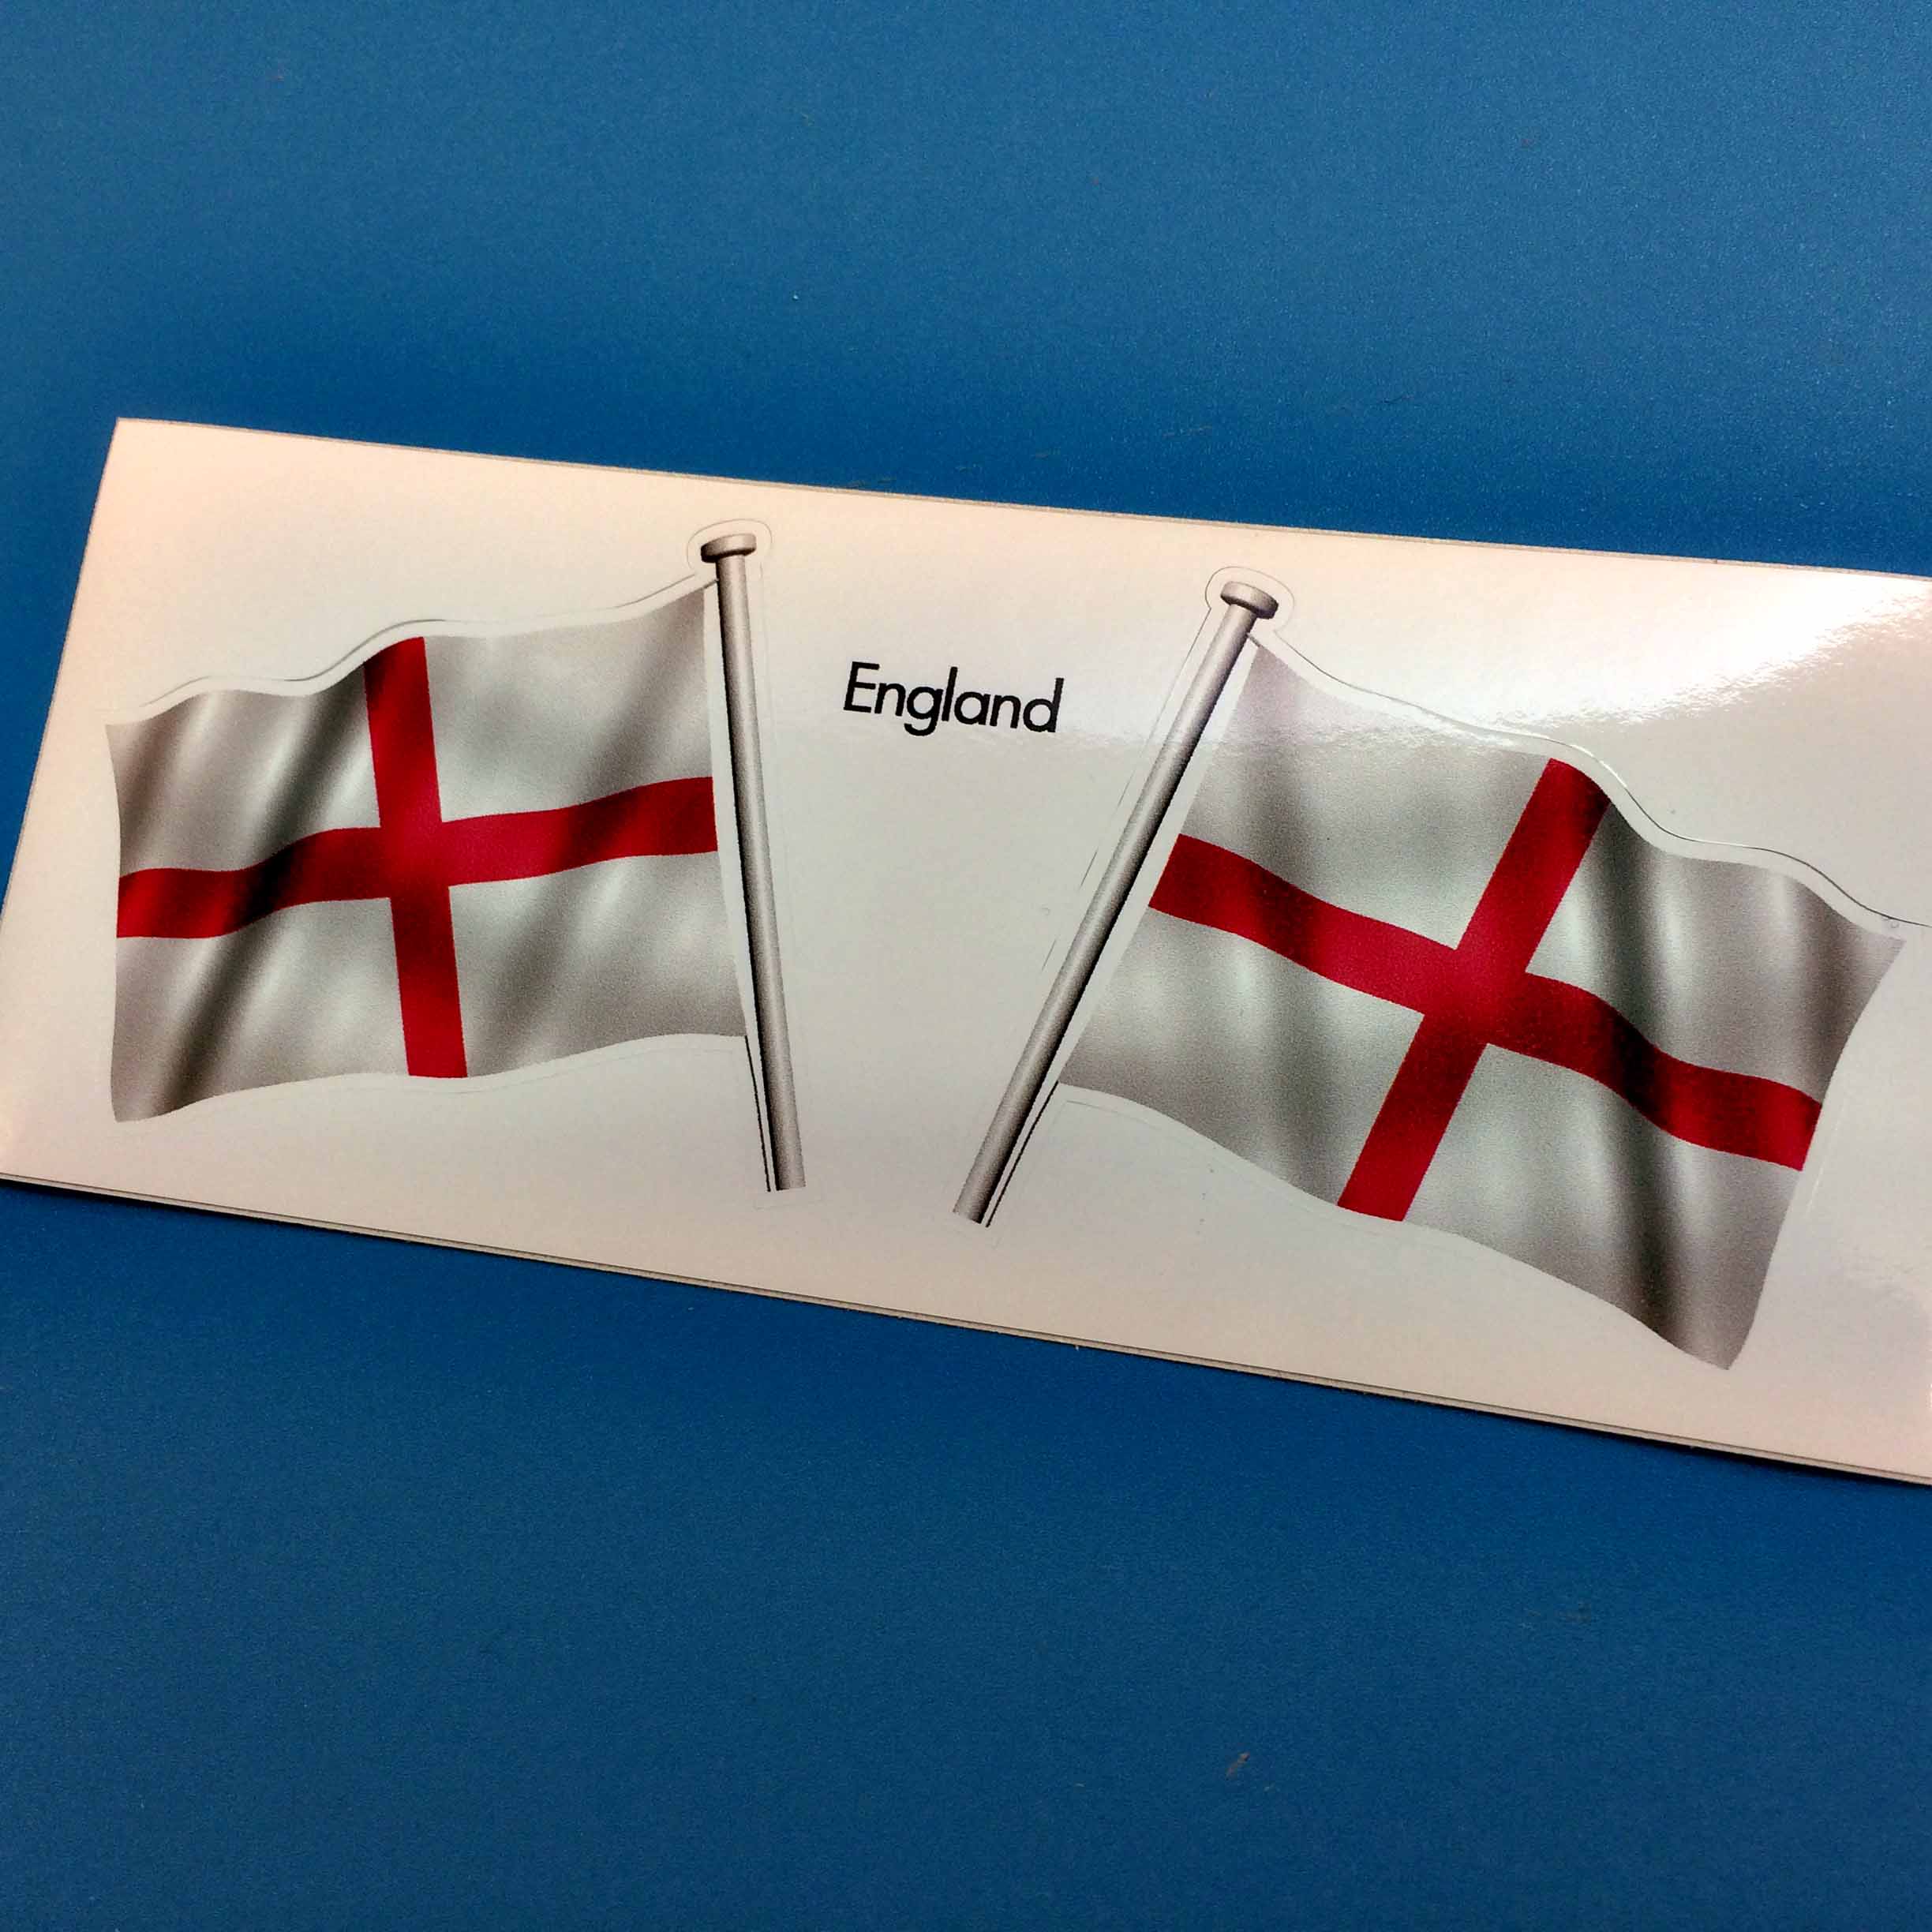 ENGLAND UK GB FLAG AND POLE STICKERS. A wavy flag of England on a pole. A red cross on a white field.